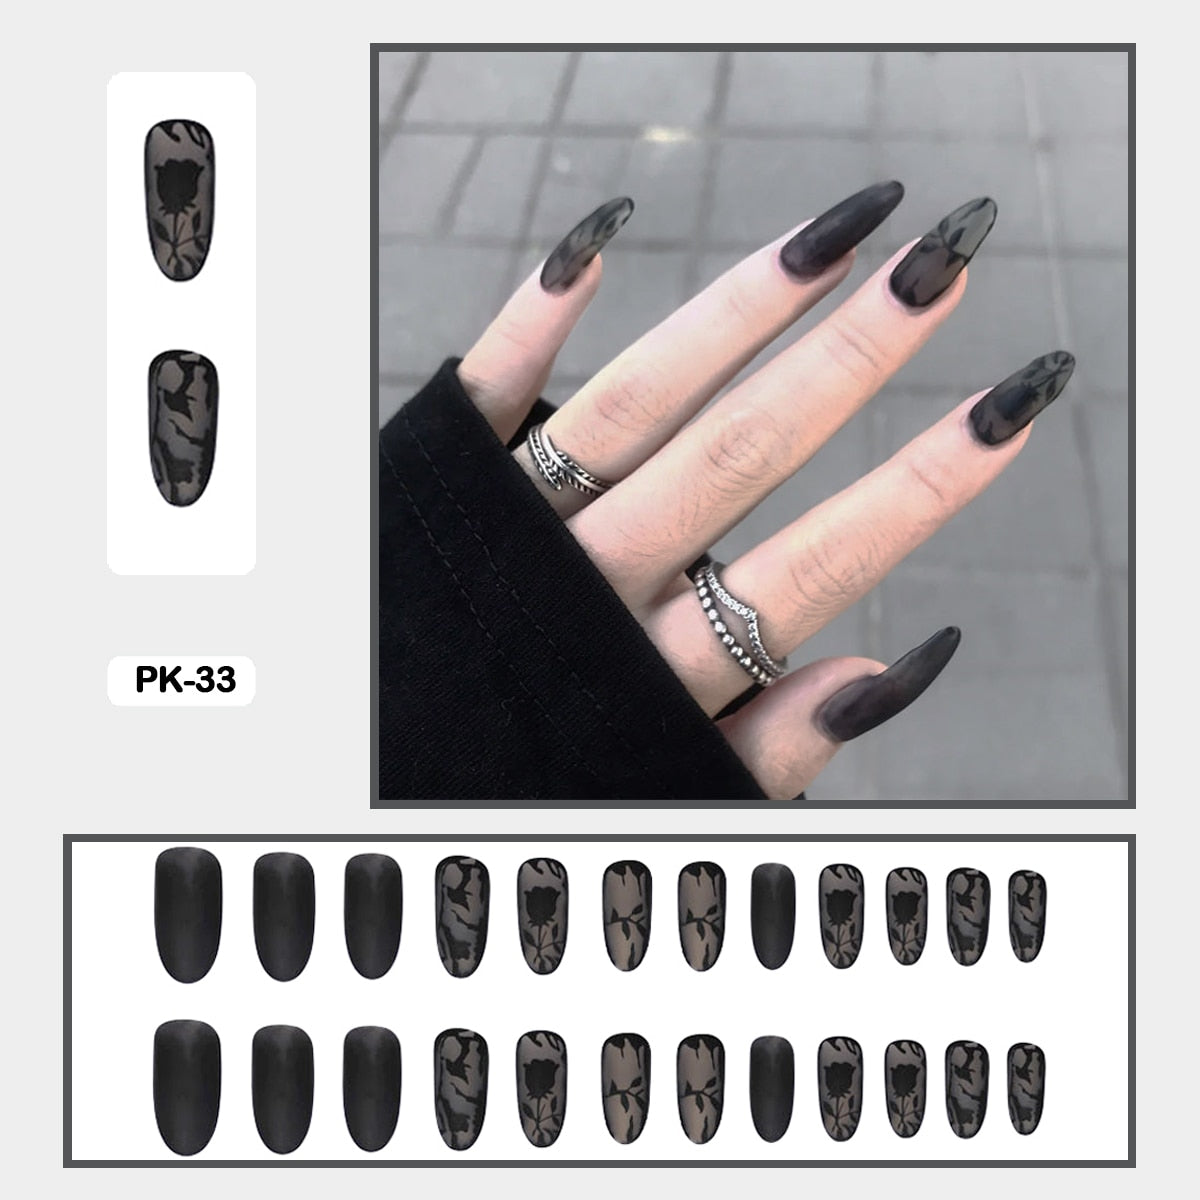 Graduation gifts Dark Rose Nail Art Translucent Almond Shape Wearable False Nails With Glue And Sticker 24pcs/box With Wearing Tools As Gift